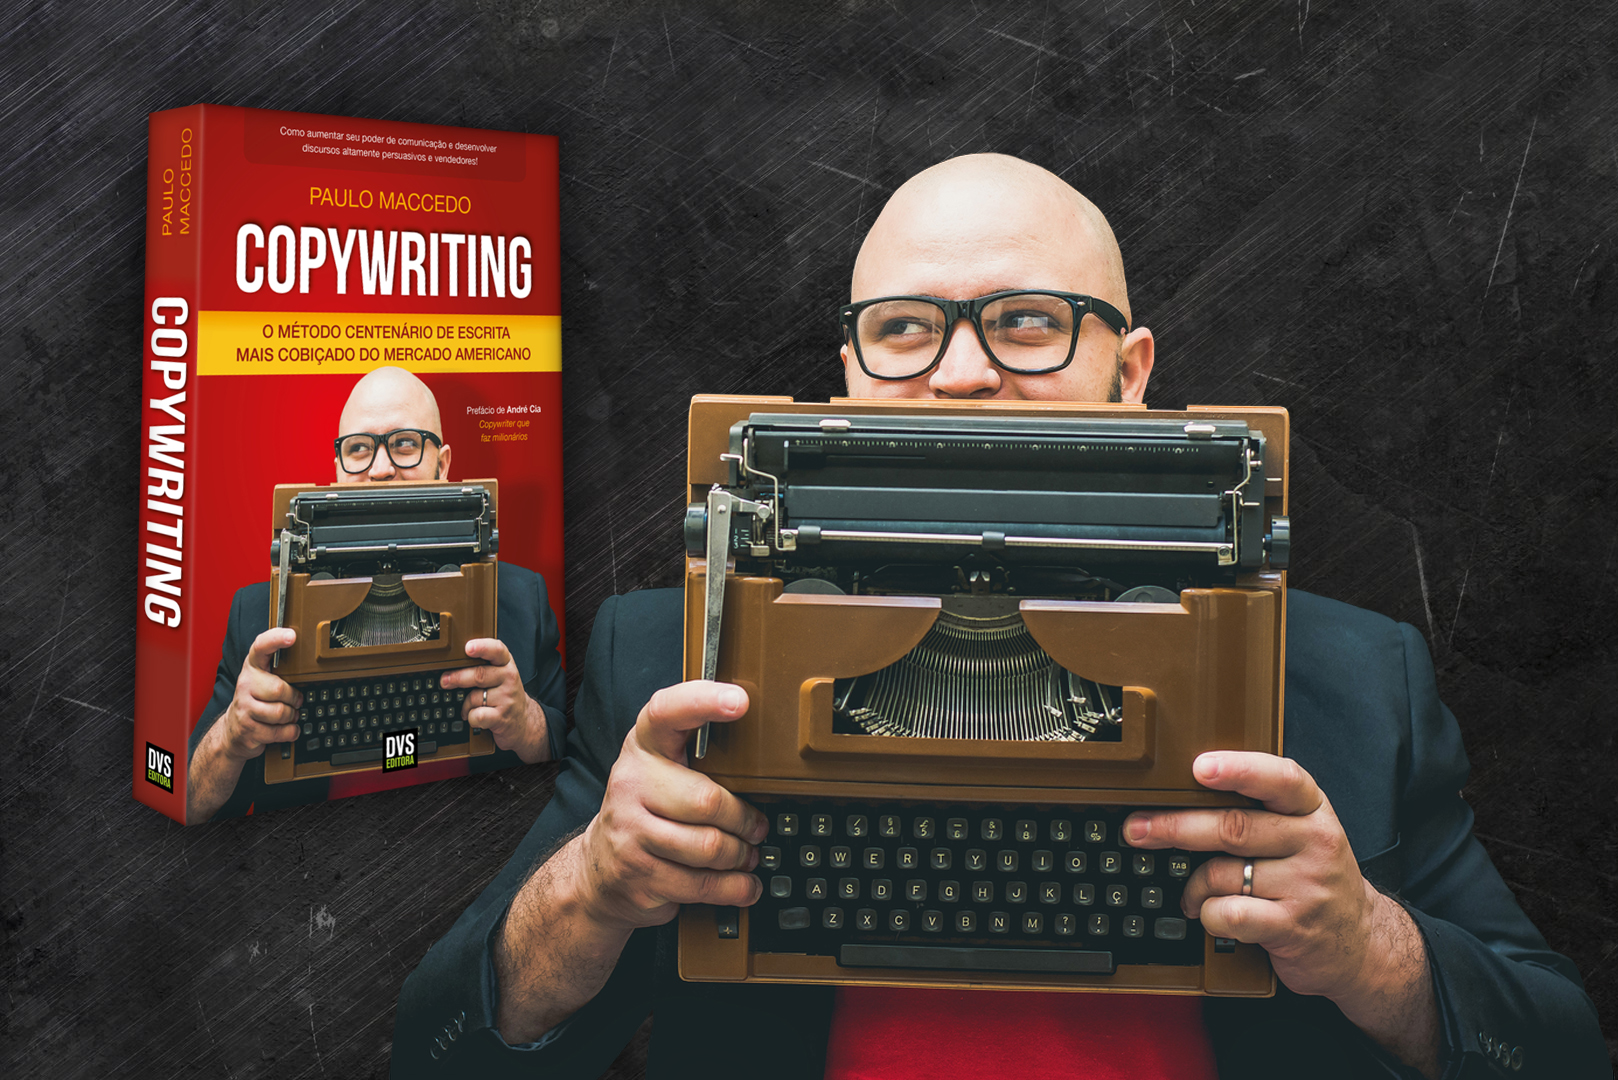 Review of the book "Copywriting" by Paulo Maccedo » Portal